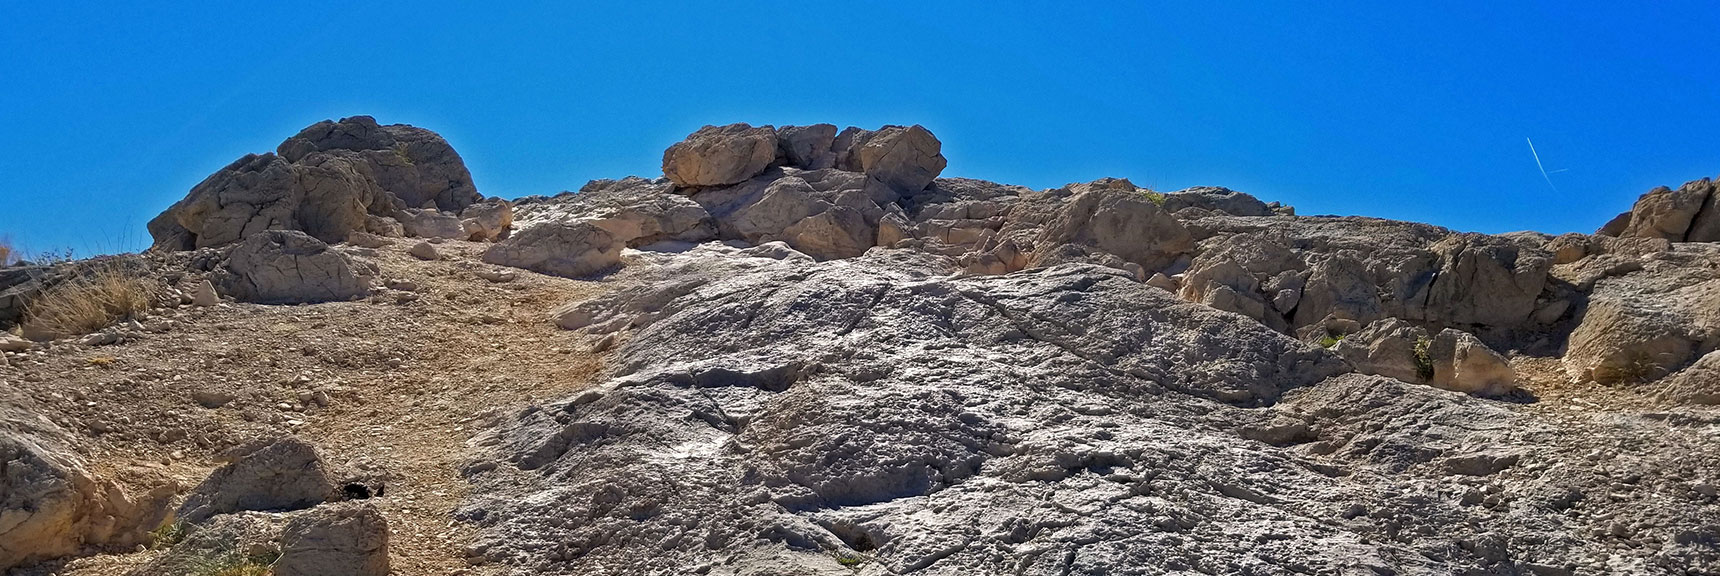 Just Below the Summit. Footing on Rock is the Most Secure | Lone Mountain | Las Vegas, Nevada